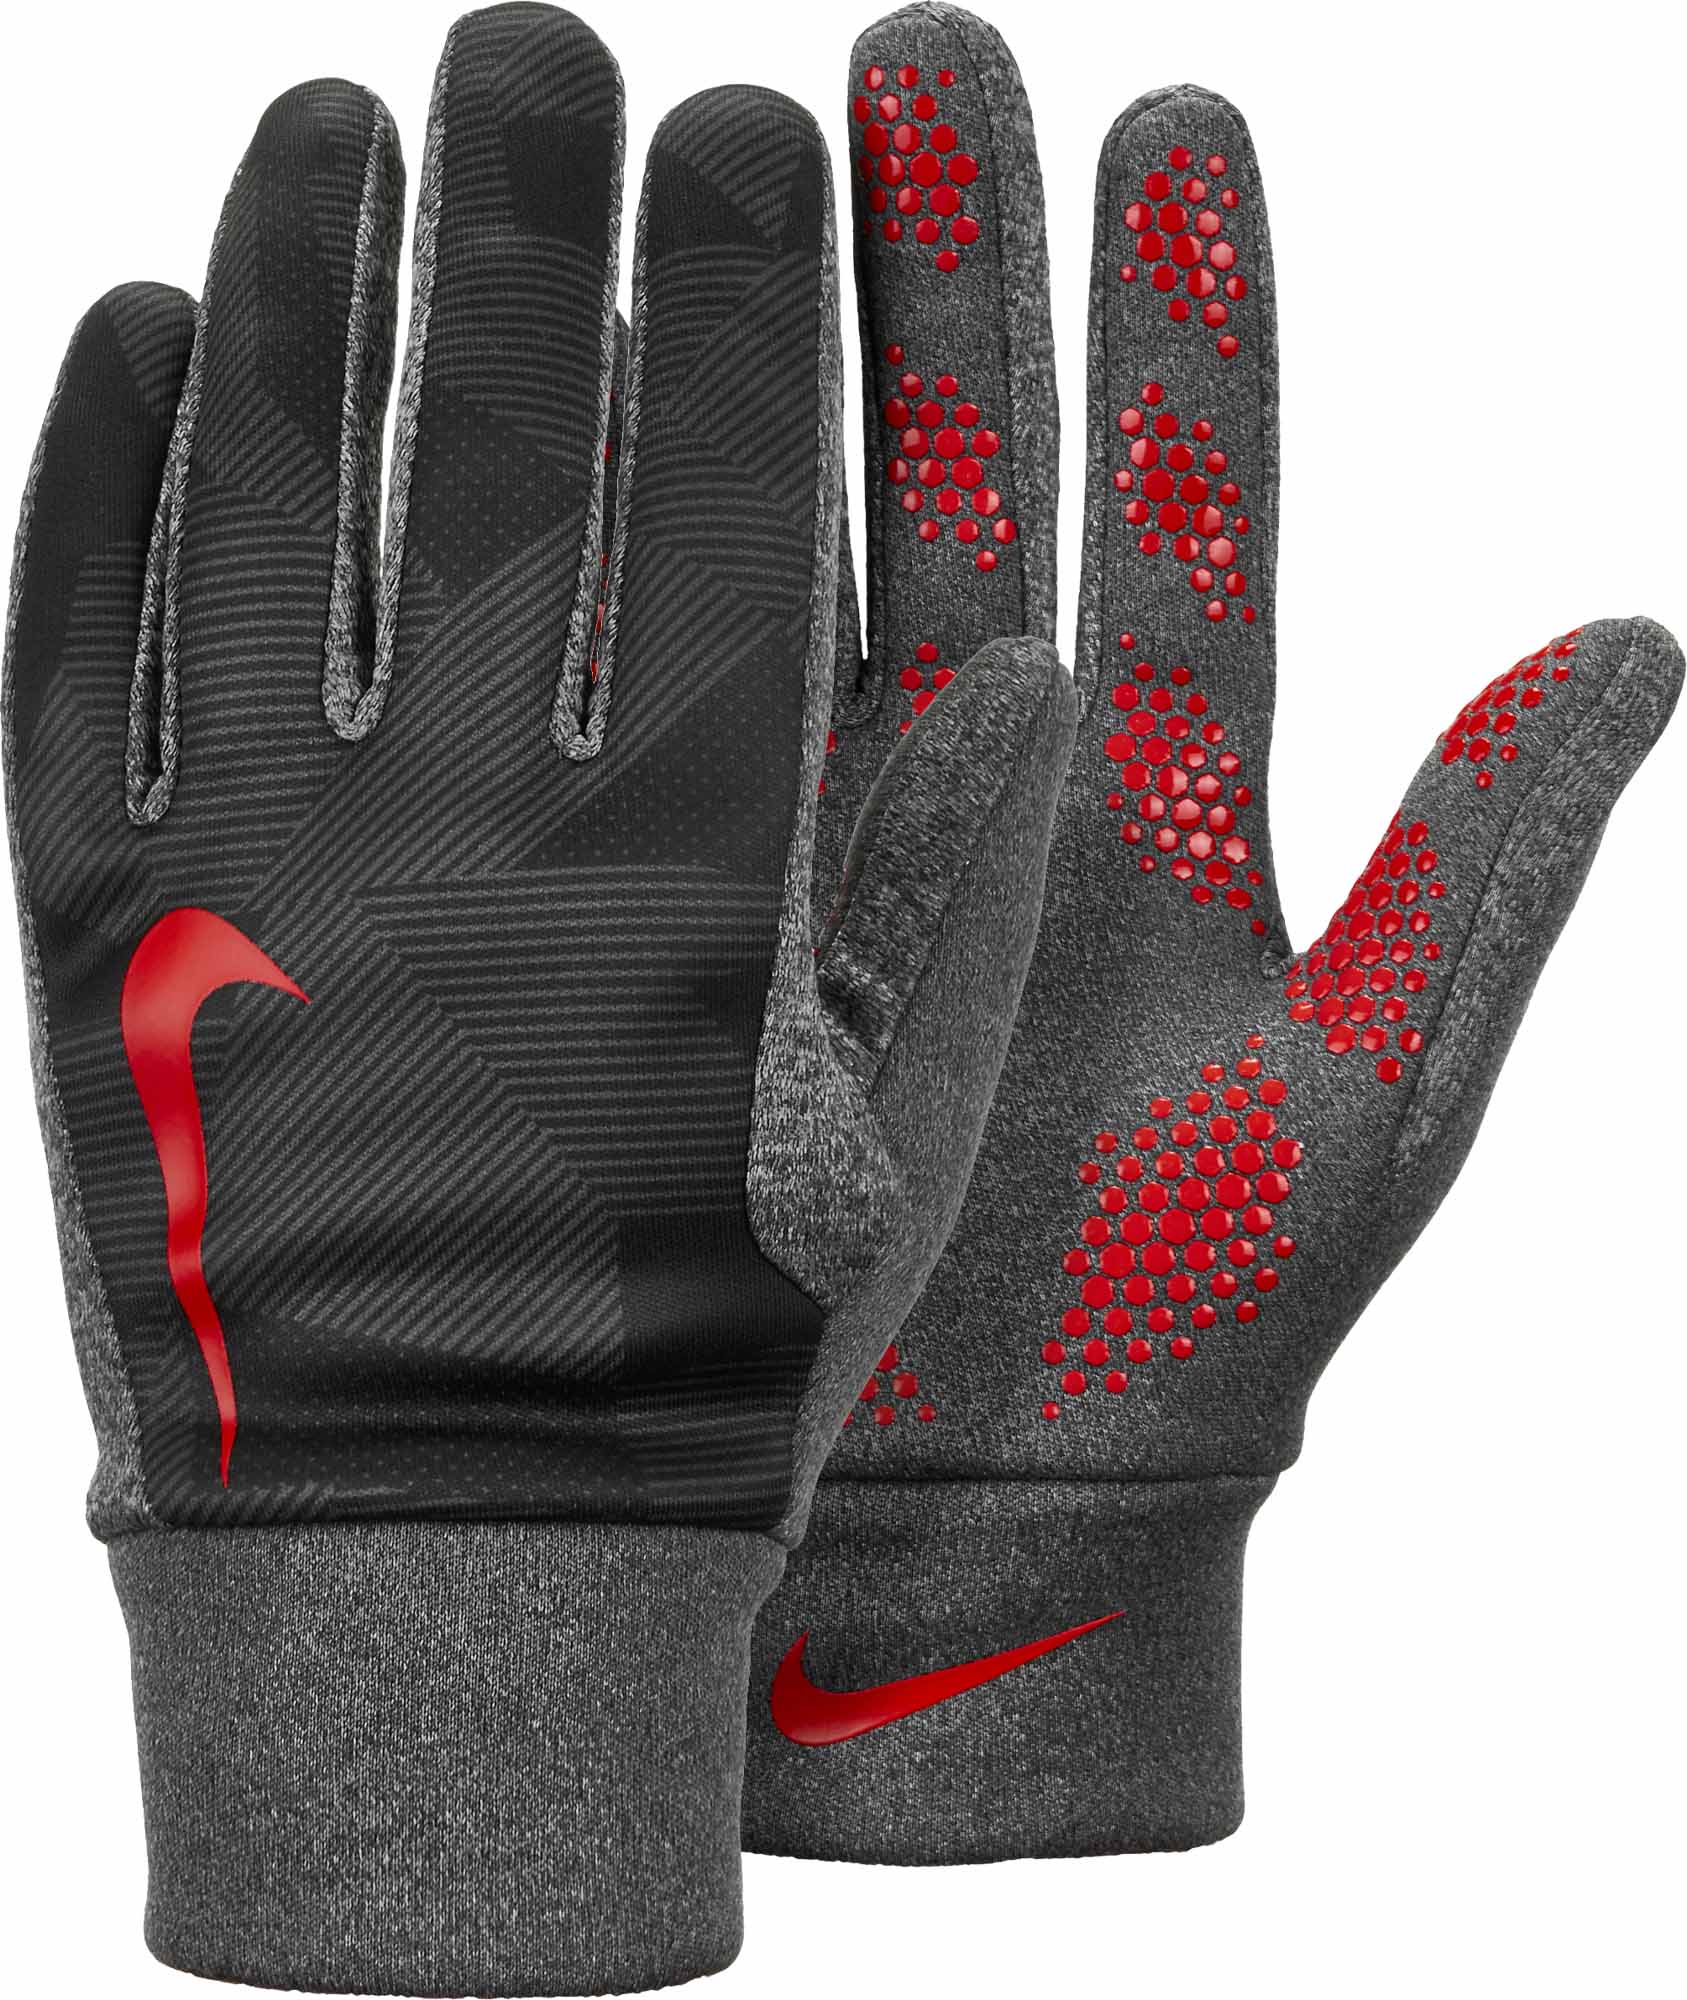 nike field player gloves